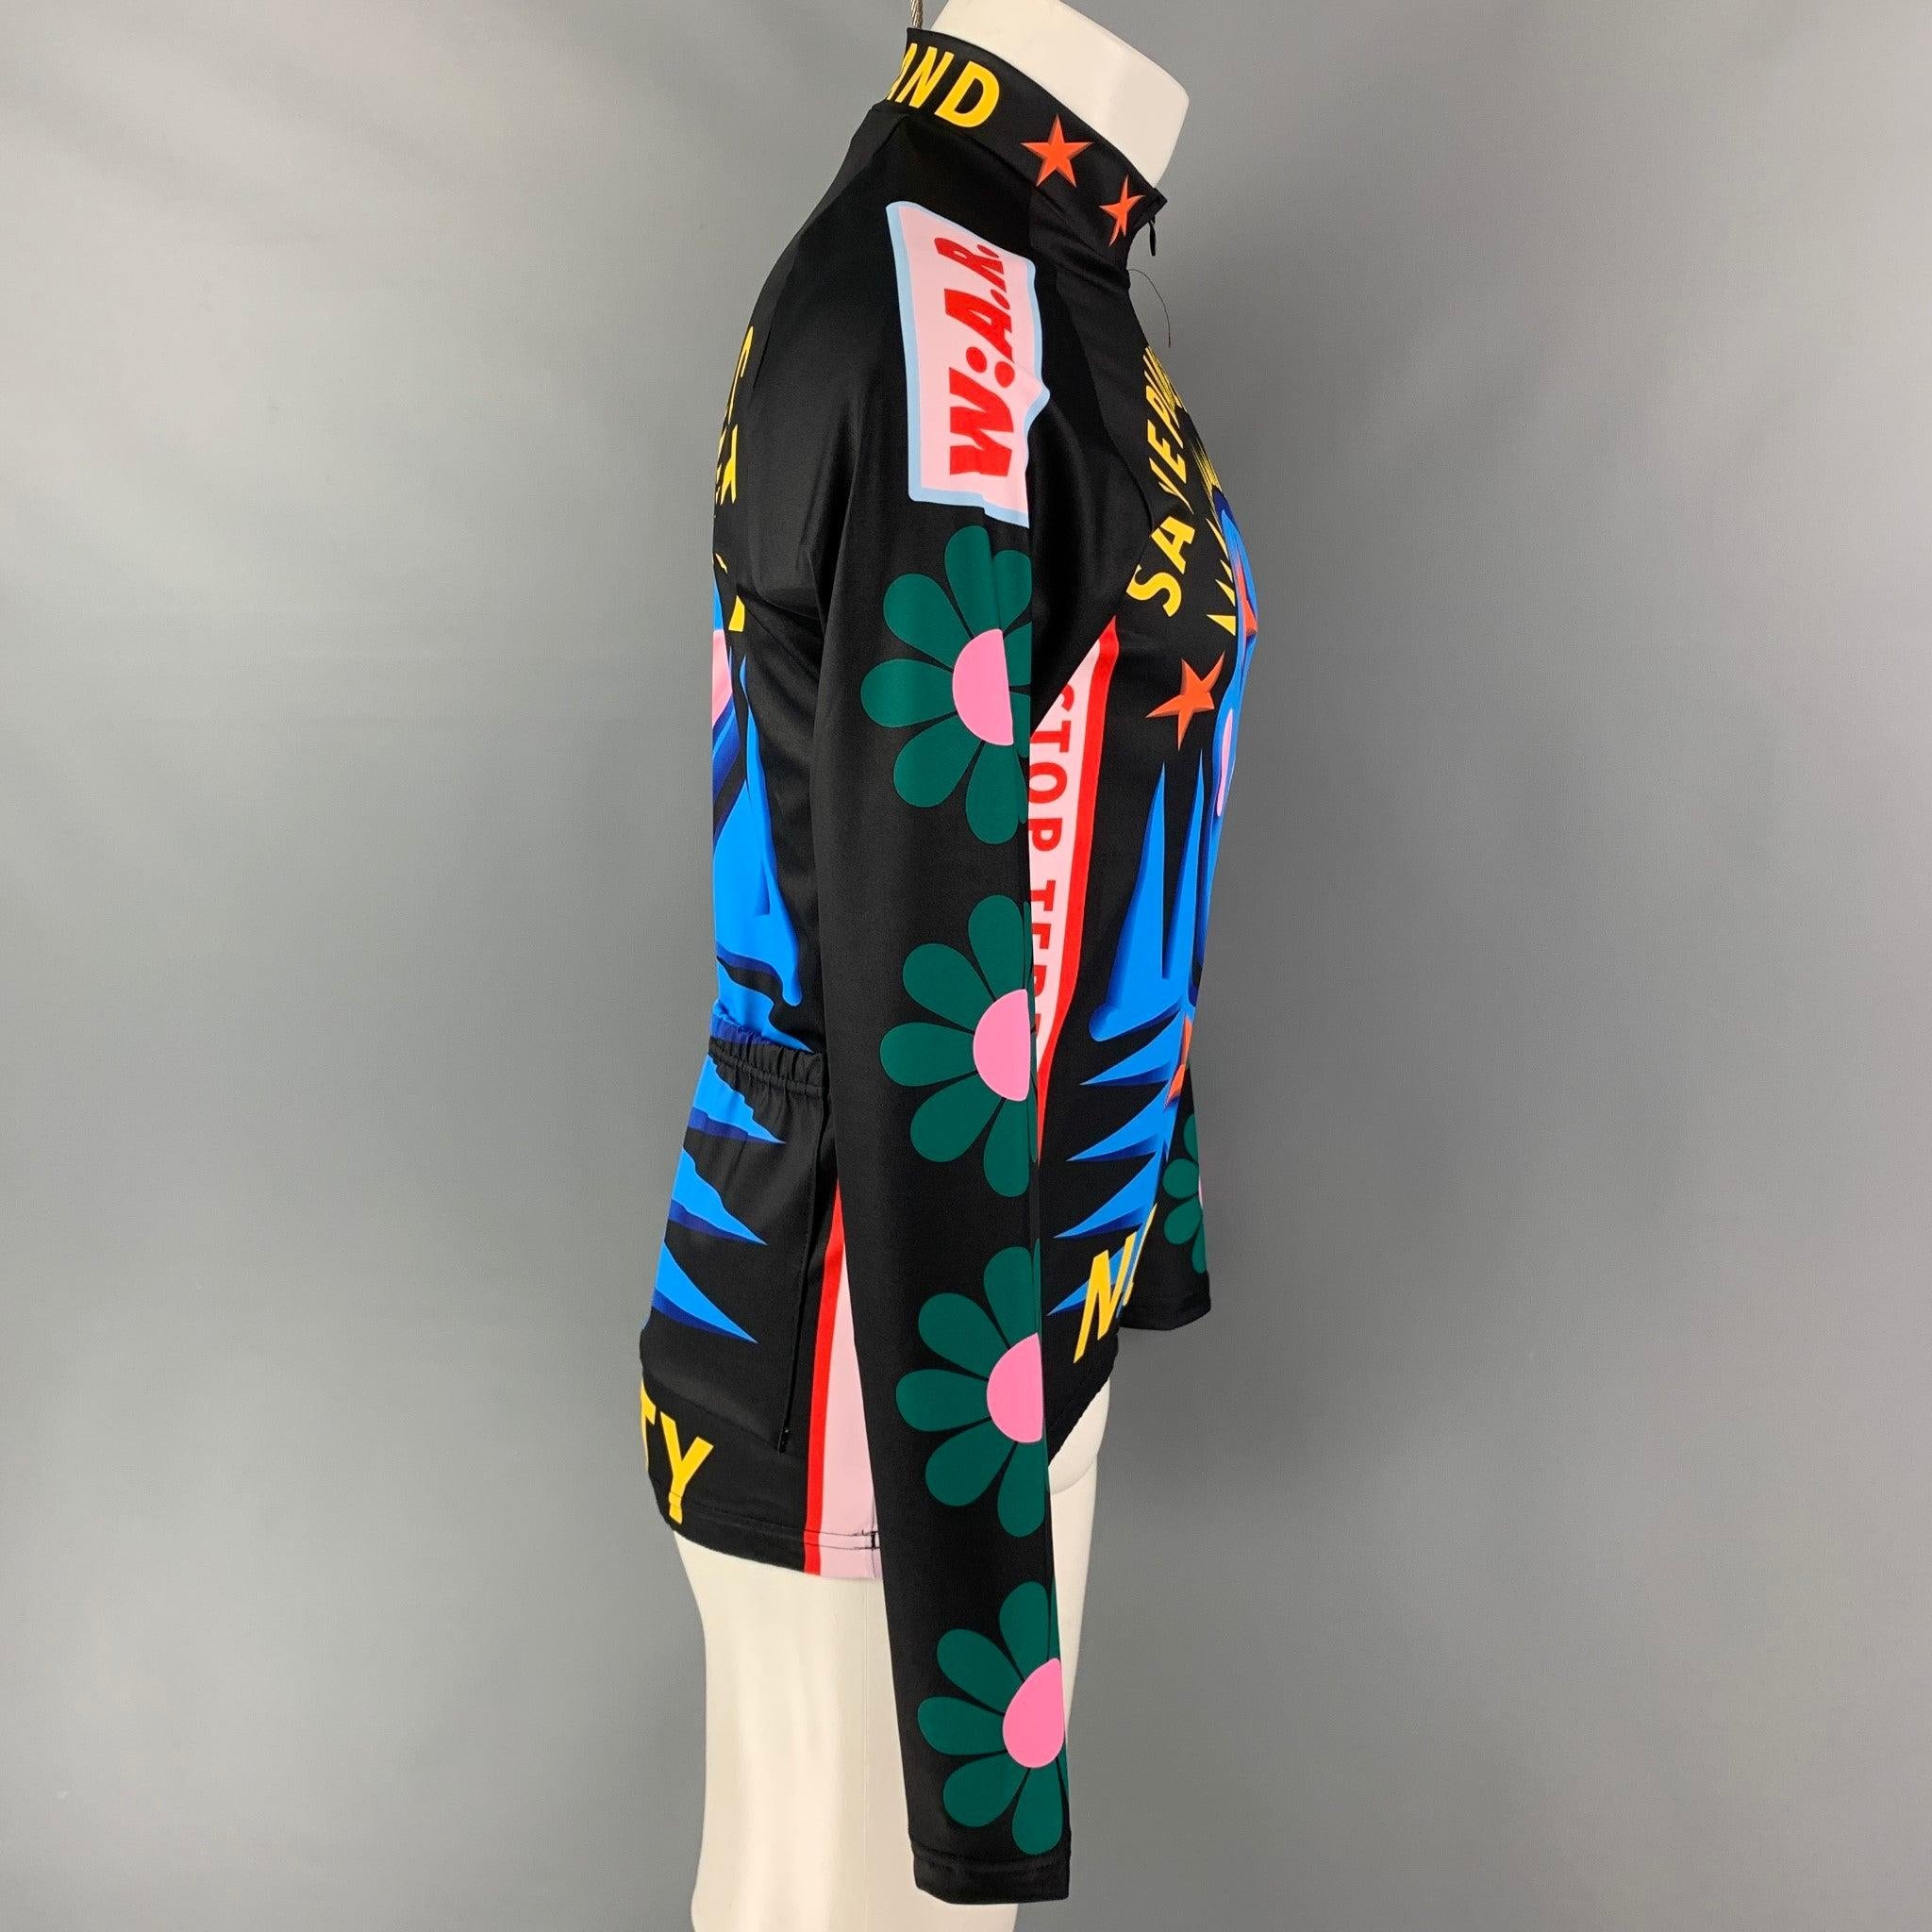 Fall 2021 - Save the PlaneWalter Van Beirendonck Cycle Biker Jersey Pullover Top from Fall Winter 2021 collection. Features a stretch material quarter zip graphic print design, collar and back pockets.Introduced as part of Walter Van Beirendonck’s